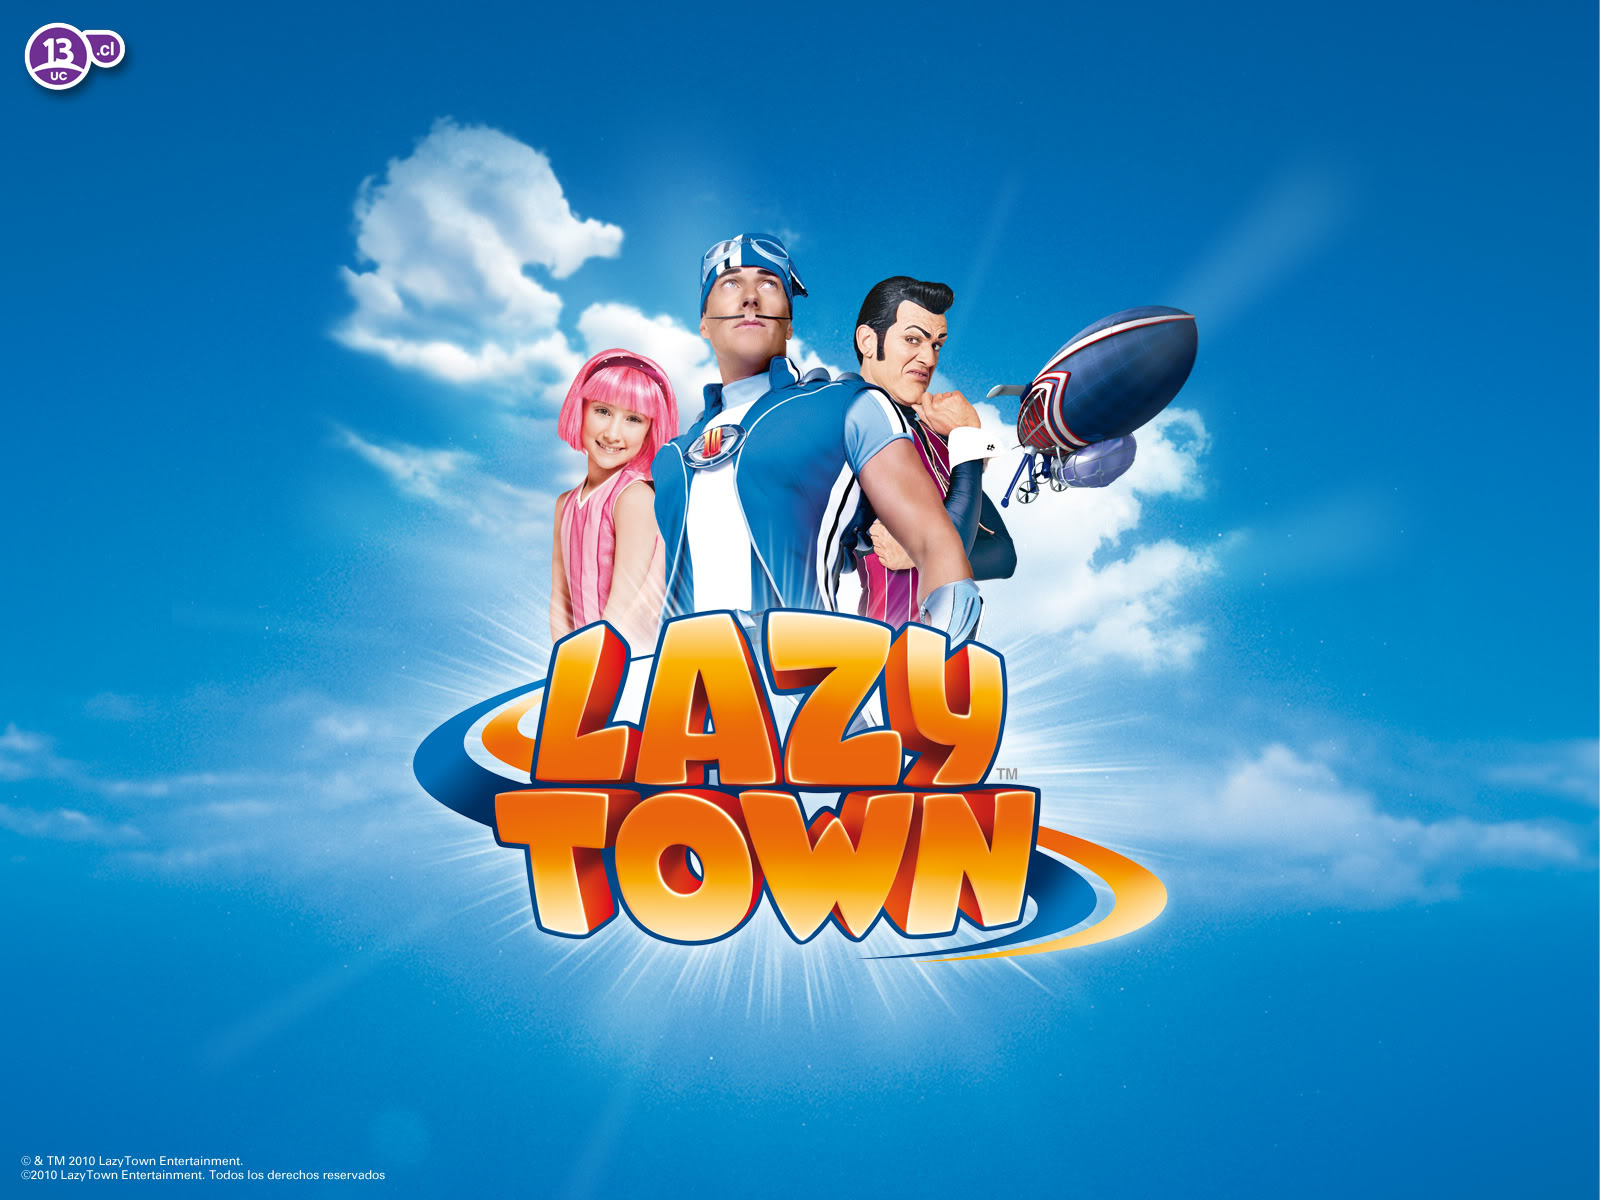 Wallpapers - Lazytown World - Lazy Town , HD Wallpaper & Backgrounds